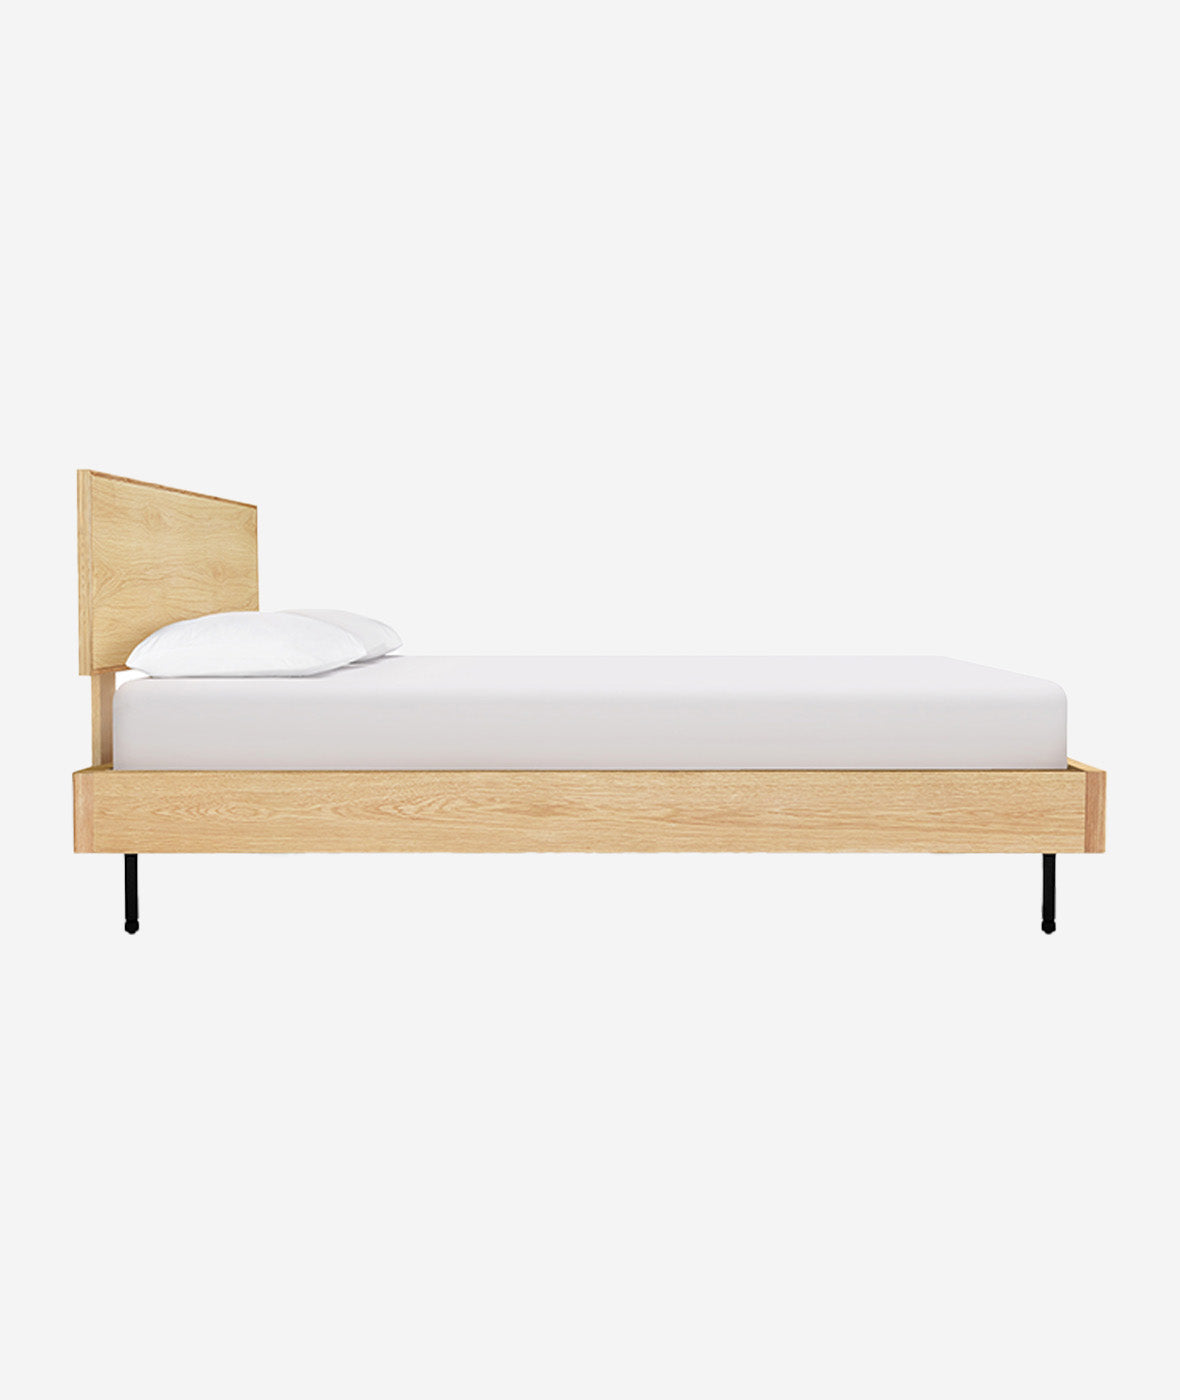 Munro Bed - More Options